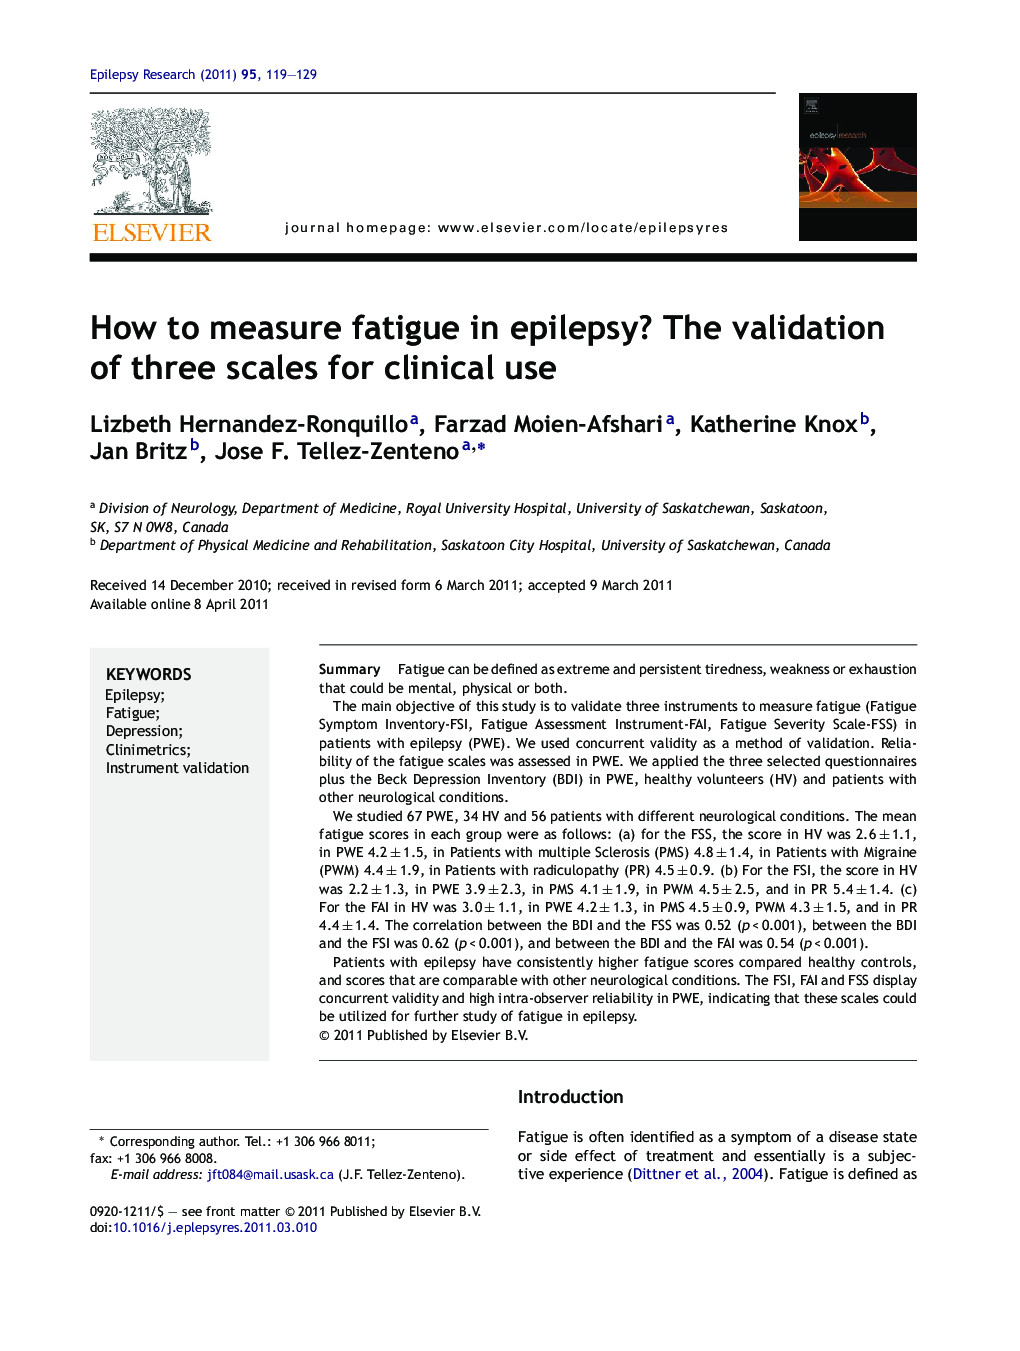 How to measure fatigue in epilepsy? The validation of three scales for clinical use